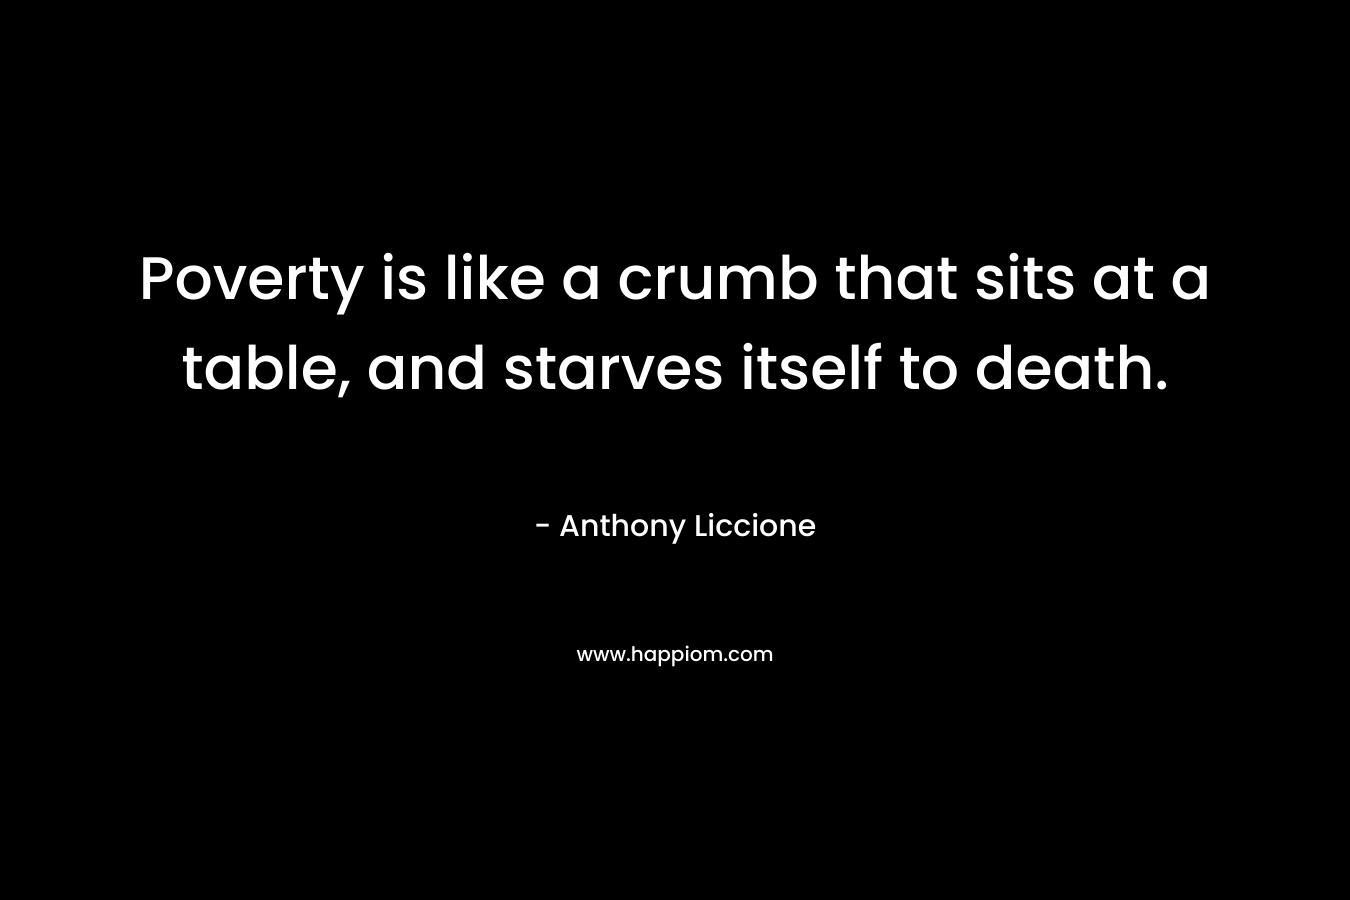 Poverty is like a crumb that sits at a table, and starves itself to death.